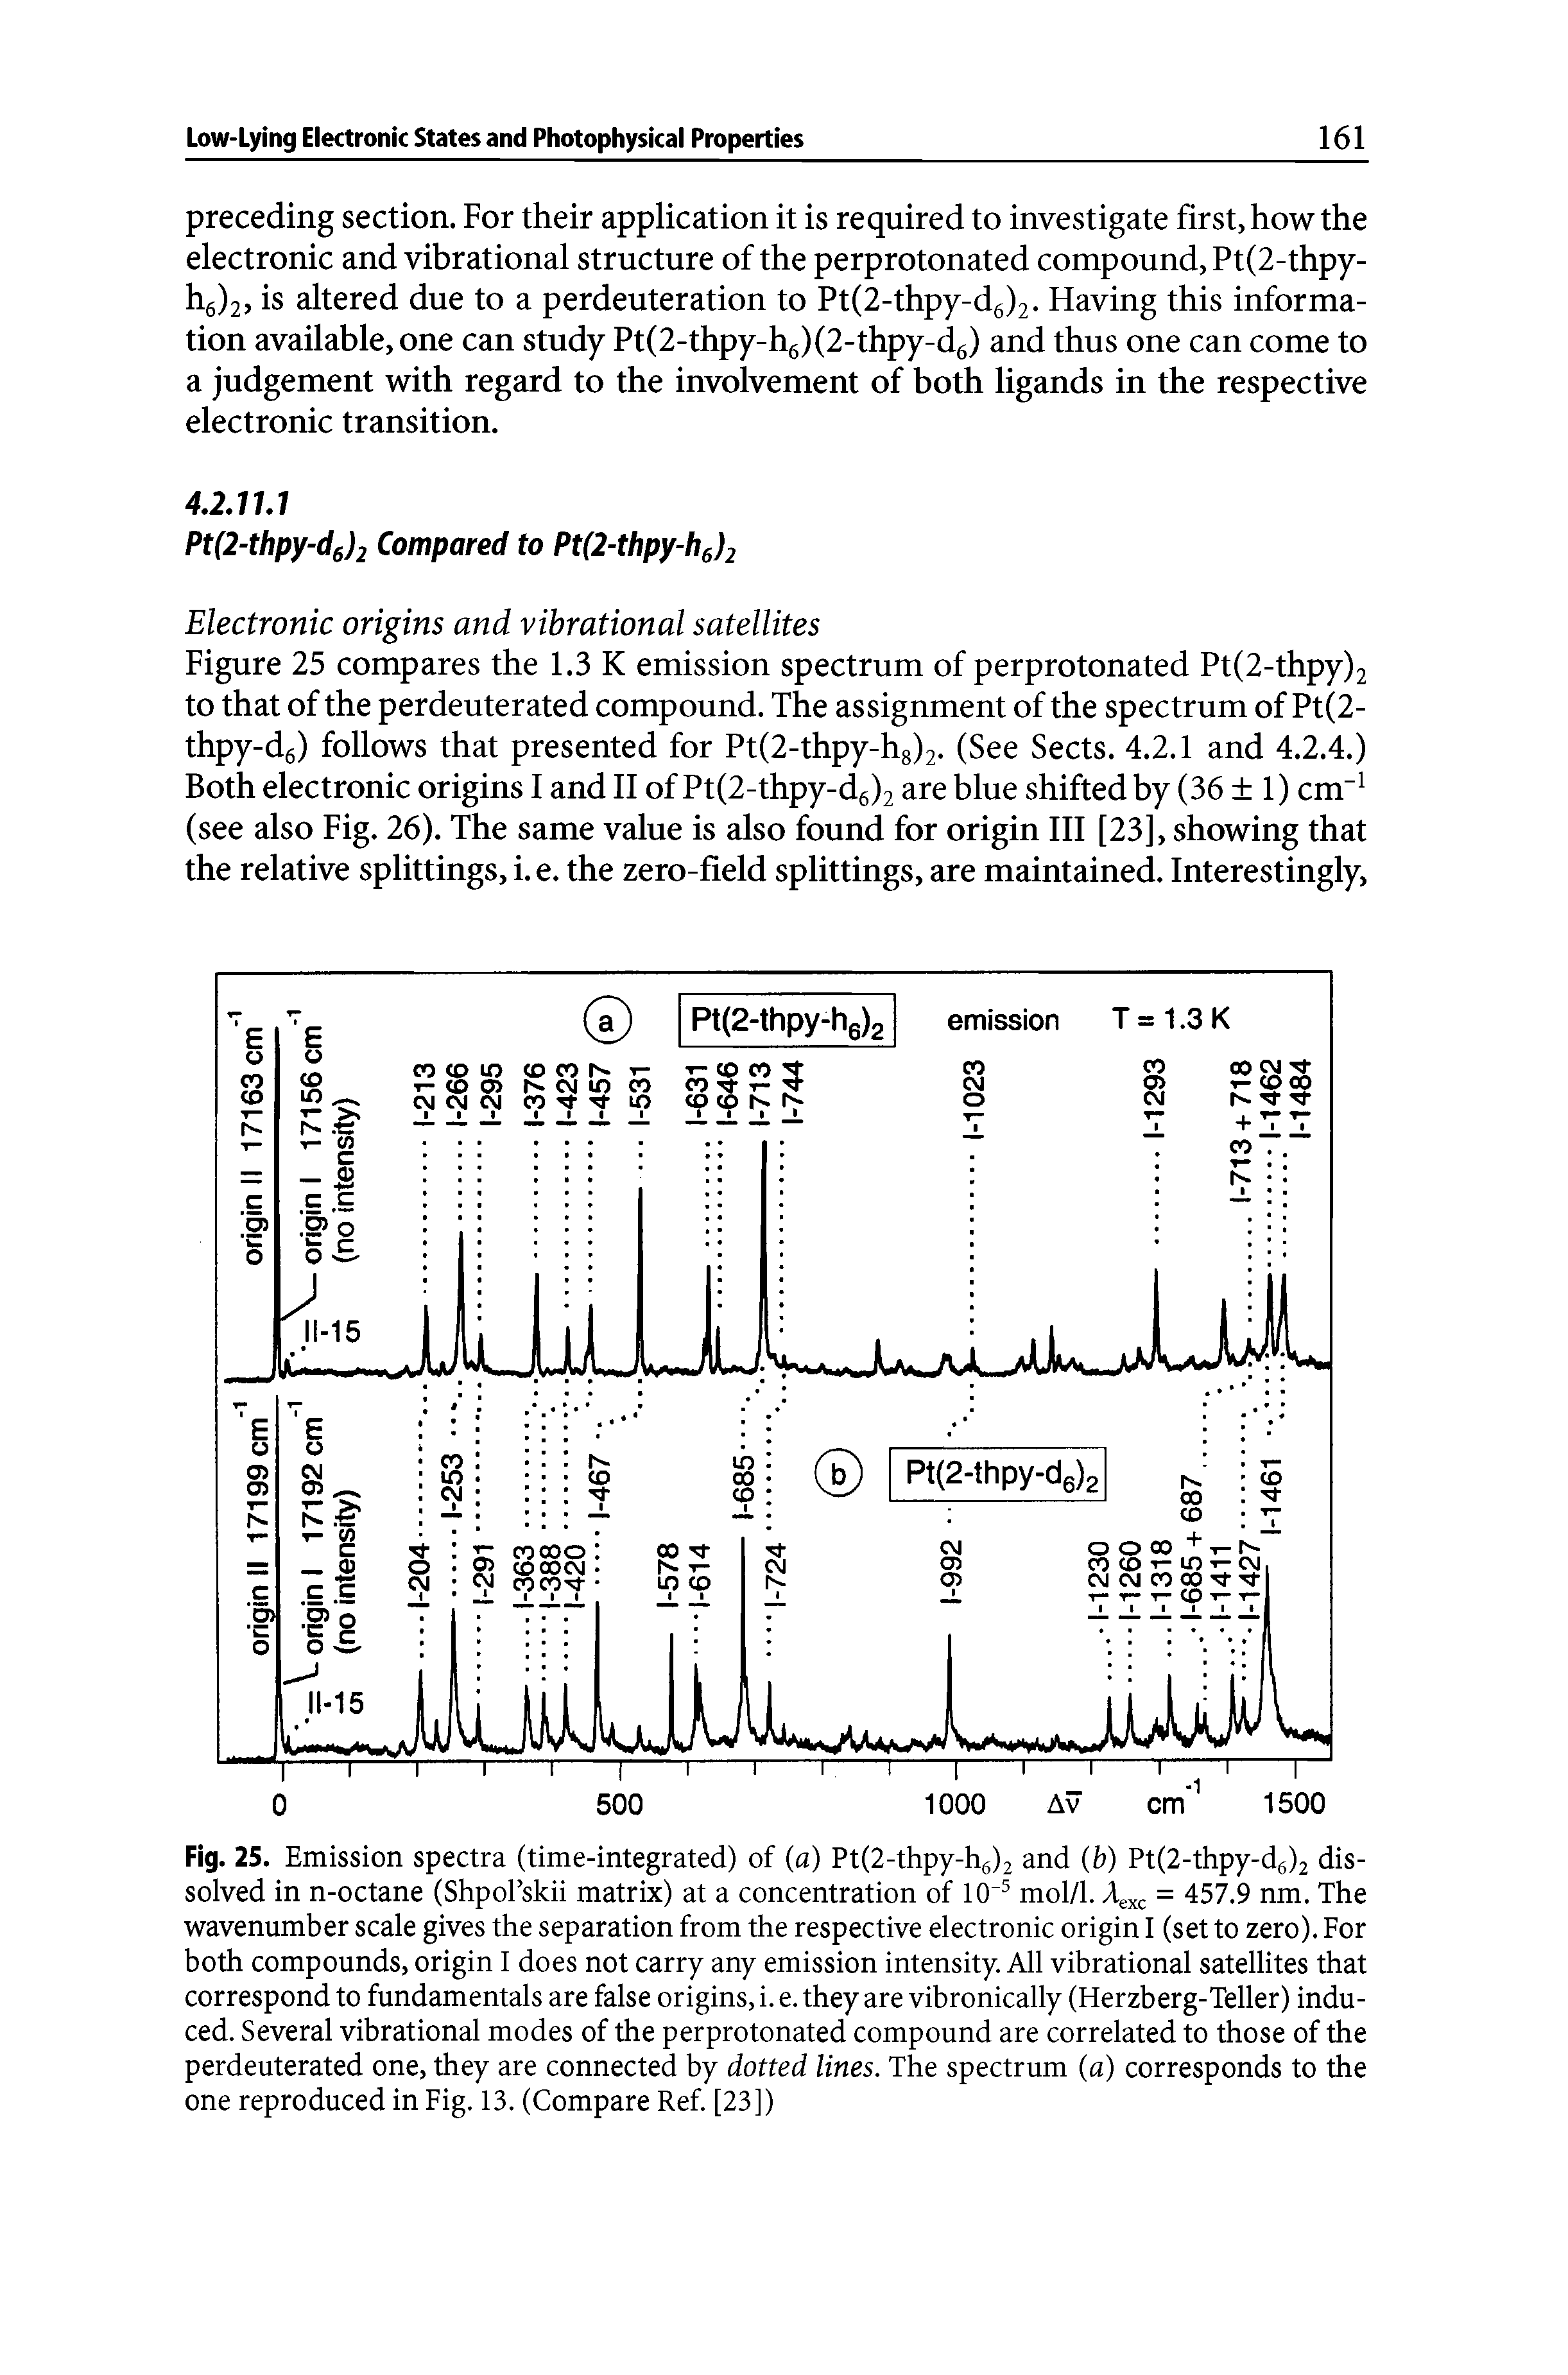 Figure 25 compares the 1.3 K emission spectrum of perprotonated Pt(2-thpy)2 to that of the perdeuterated compound. The assignment of the spectrum of Pt(2-thpy-dg) follows that presented for Pt(2-thpy-hg)2. (See Sects. 4.2.1 and 4.2.4.) Both electronic origins I and II of Pt(2-thpy-dg)2 are blue shifted by (36 1) cm (see also Fig. 26). The same value is also found for origin III [23], showing that the relative splittings, i. e. the zero-field splittings, are maintained. Interestingly,...